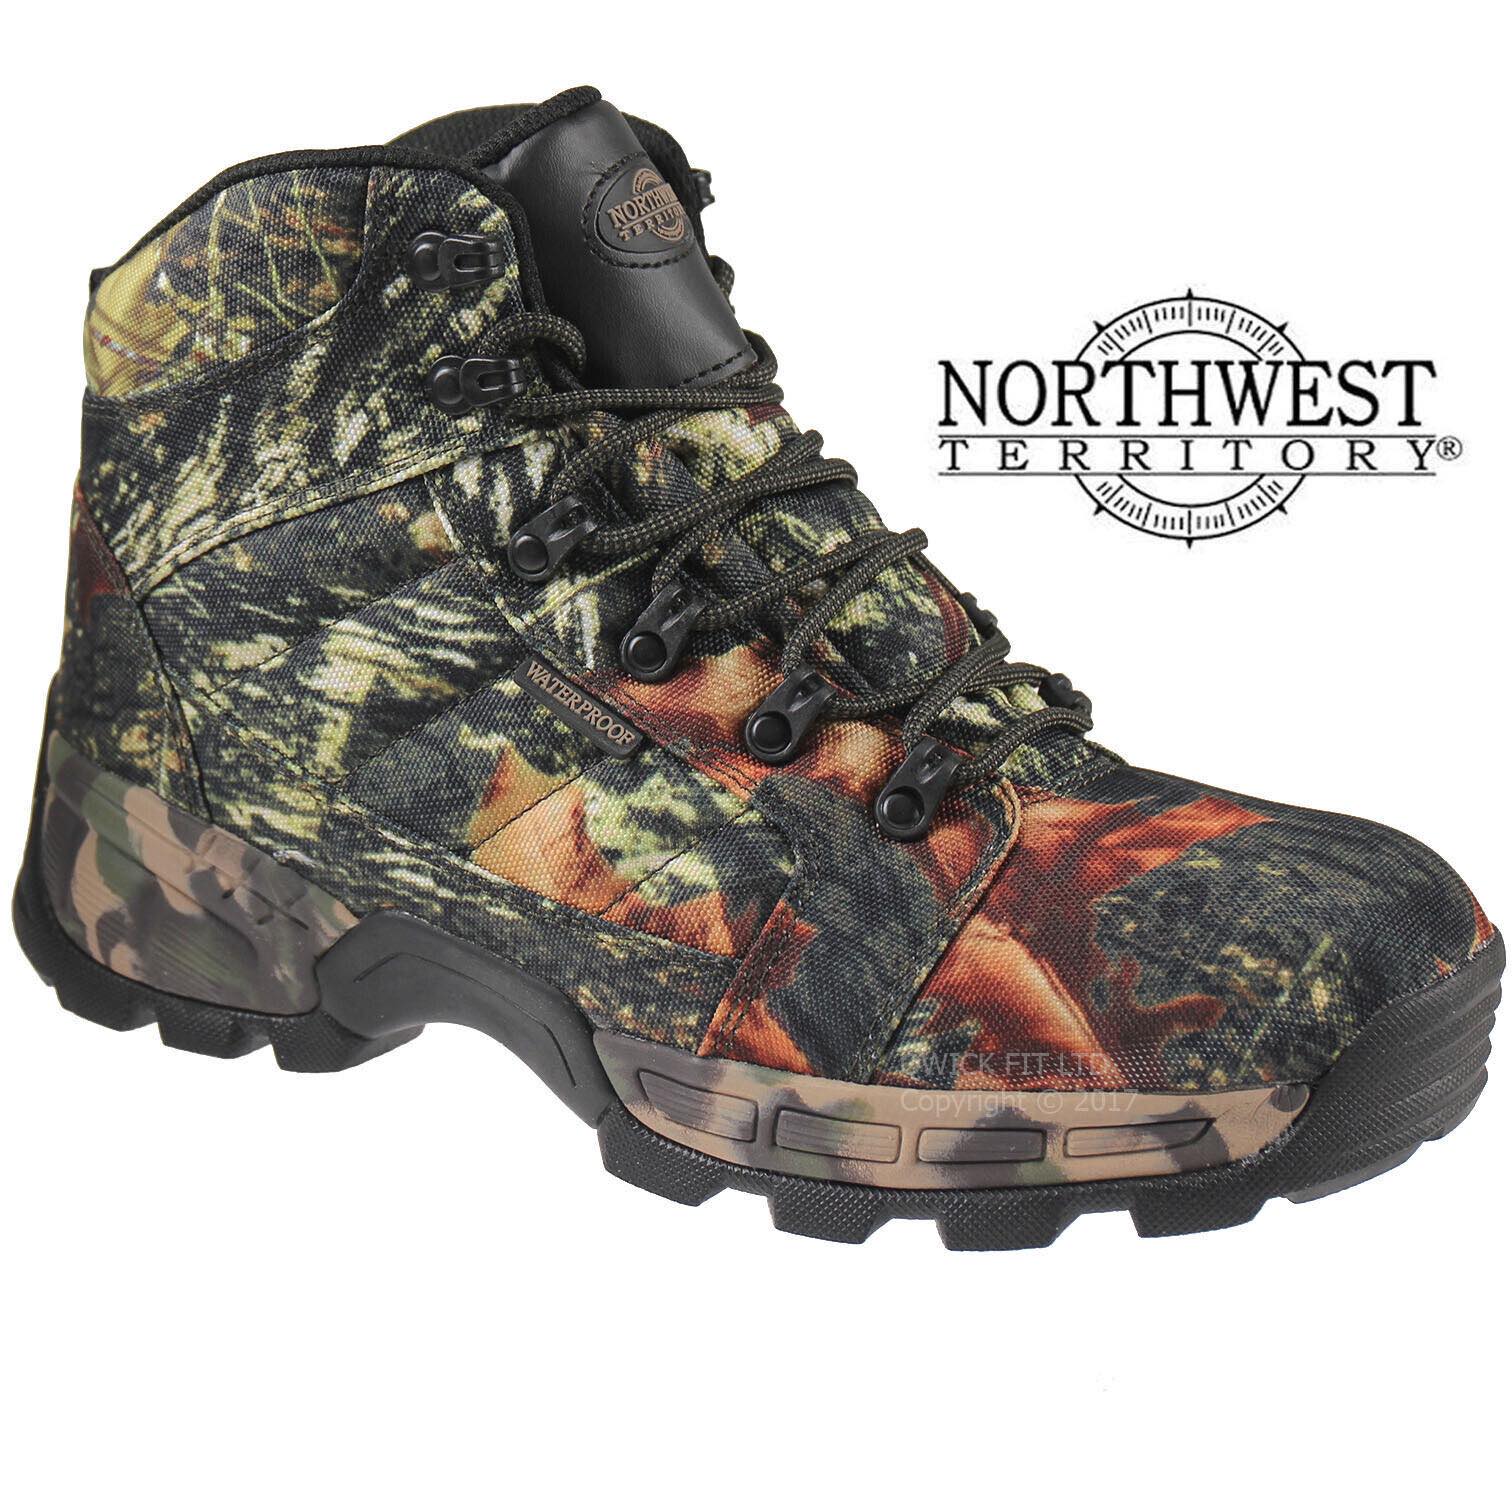 Northwest Territory Camo Boots - £ : Highland Army Surplus Store